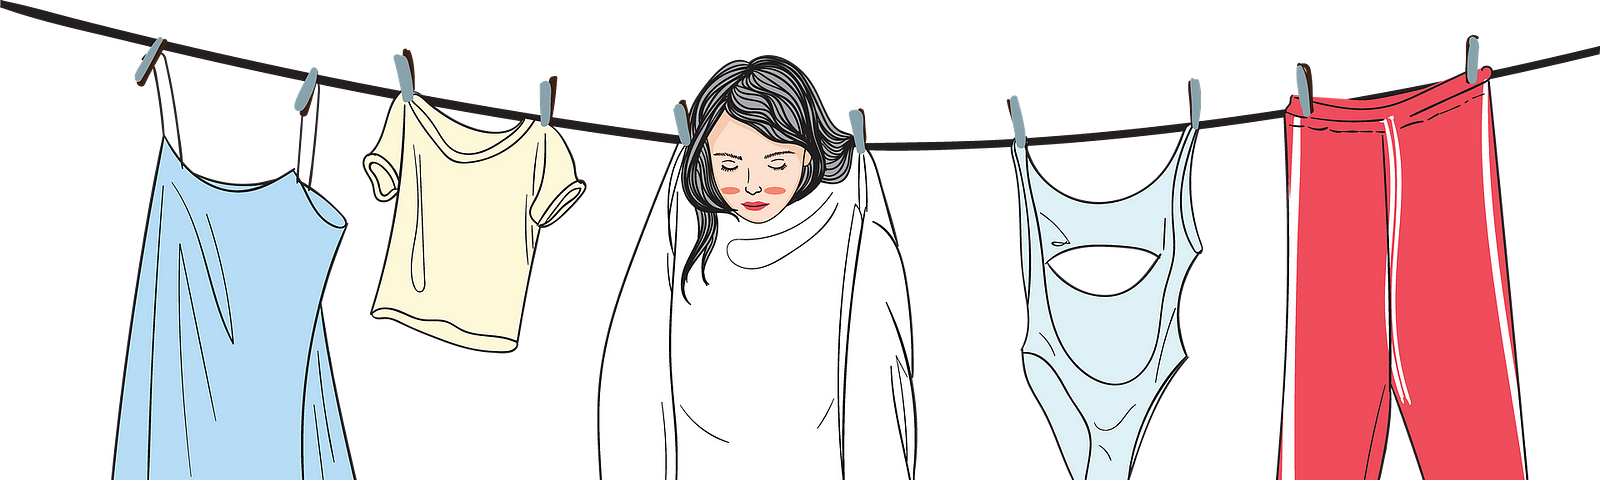 A woman hanging with her clothes on the clothesline